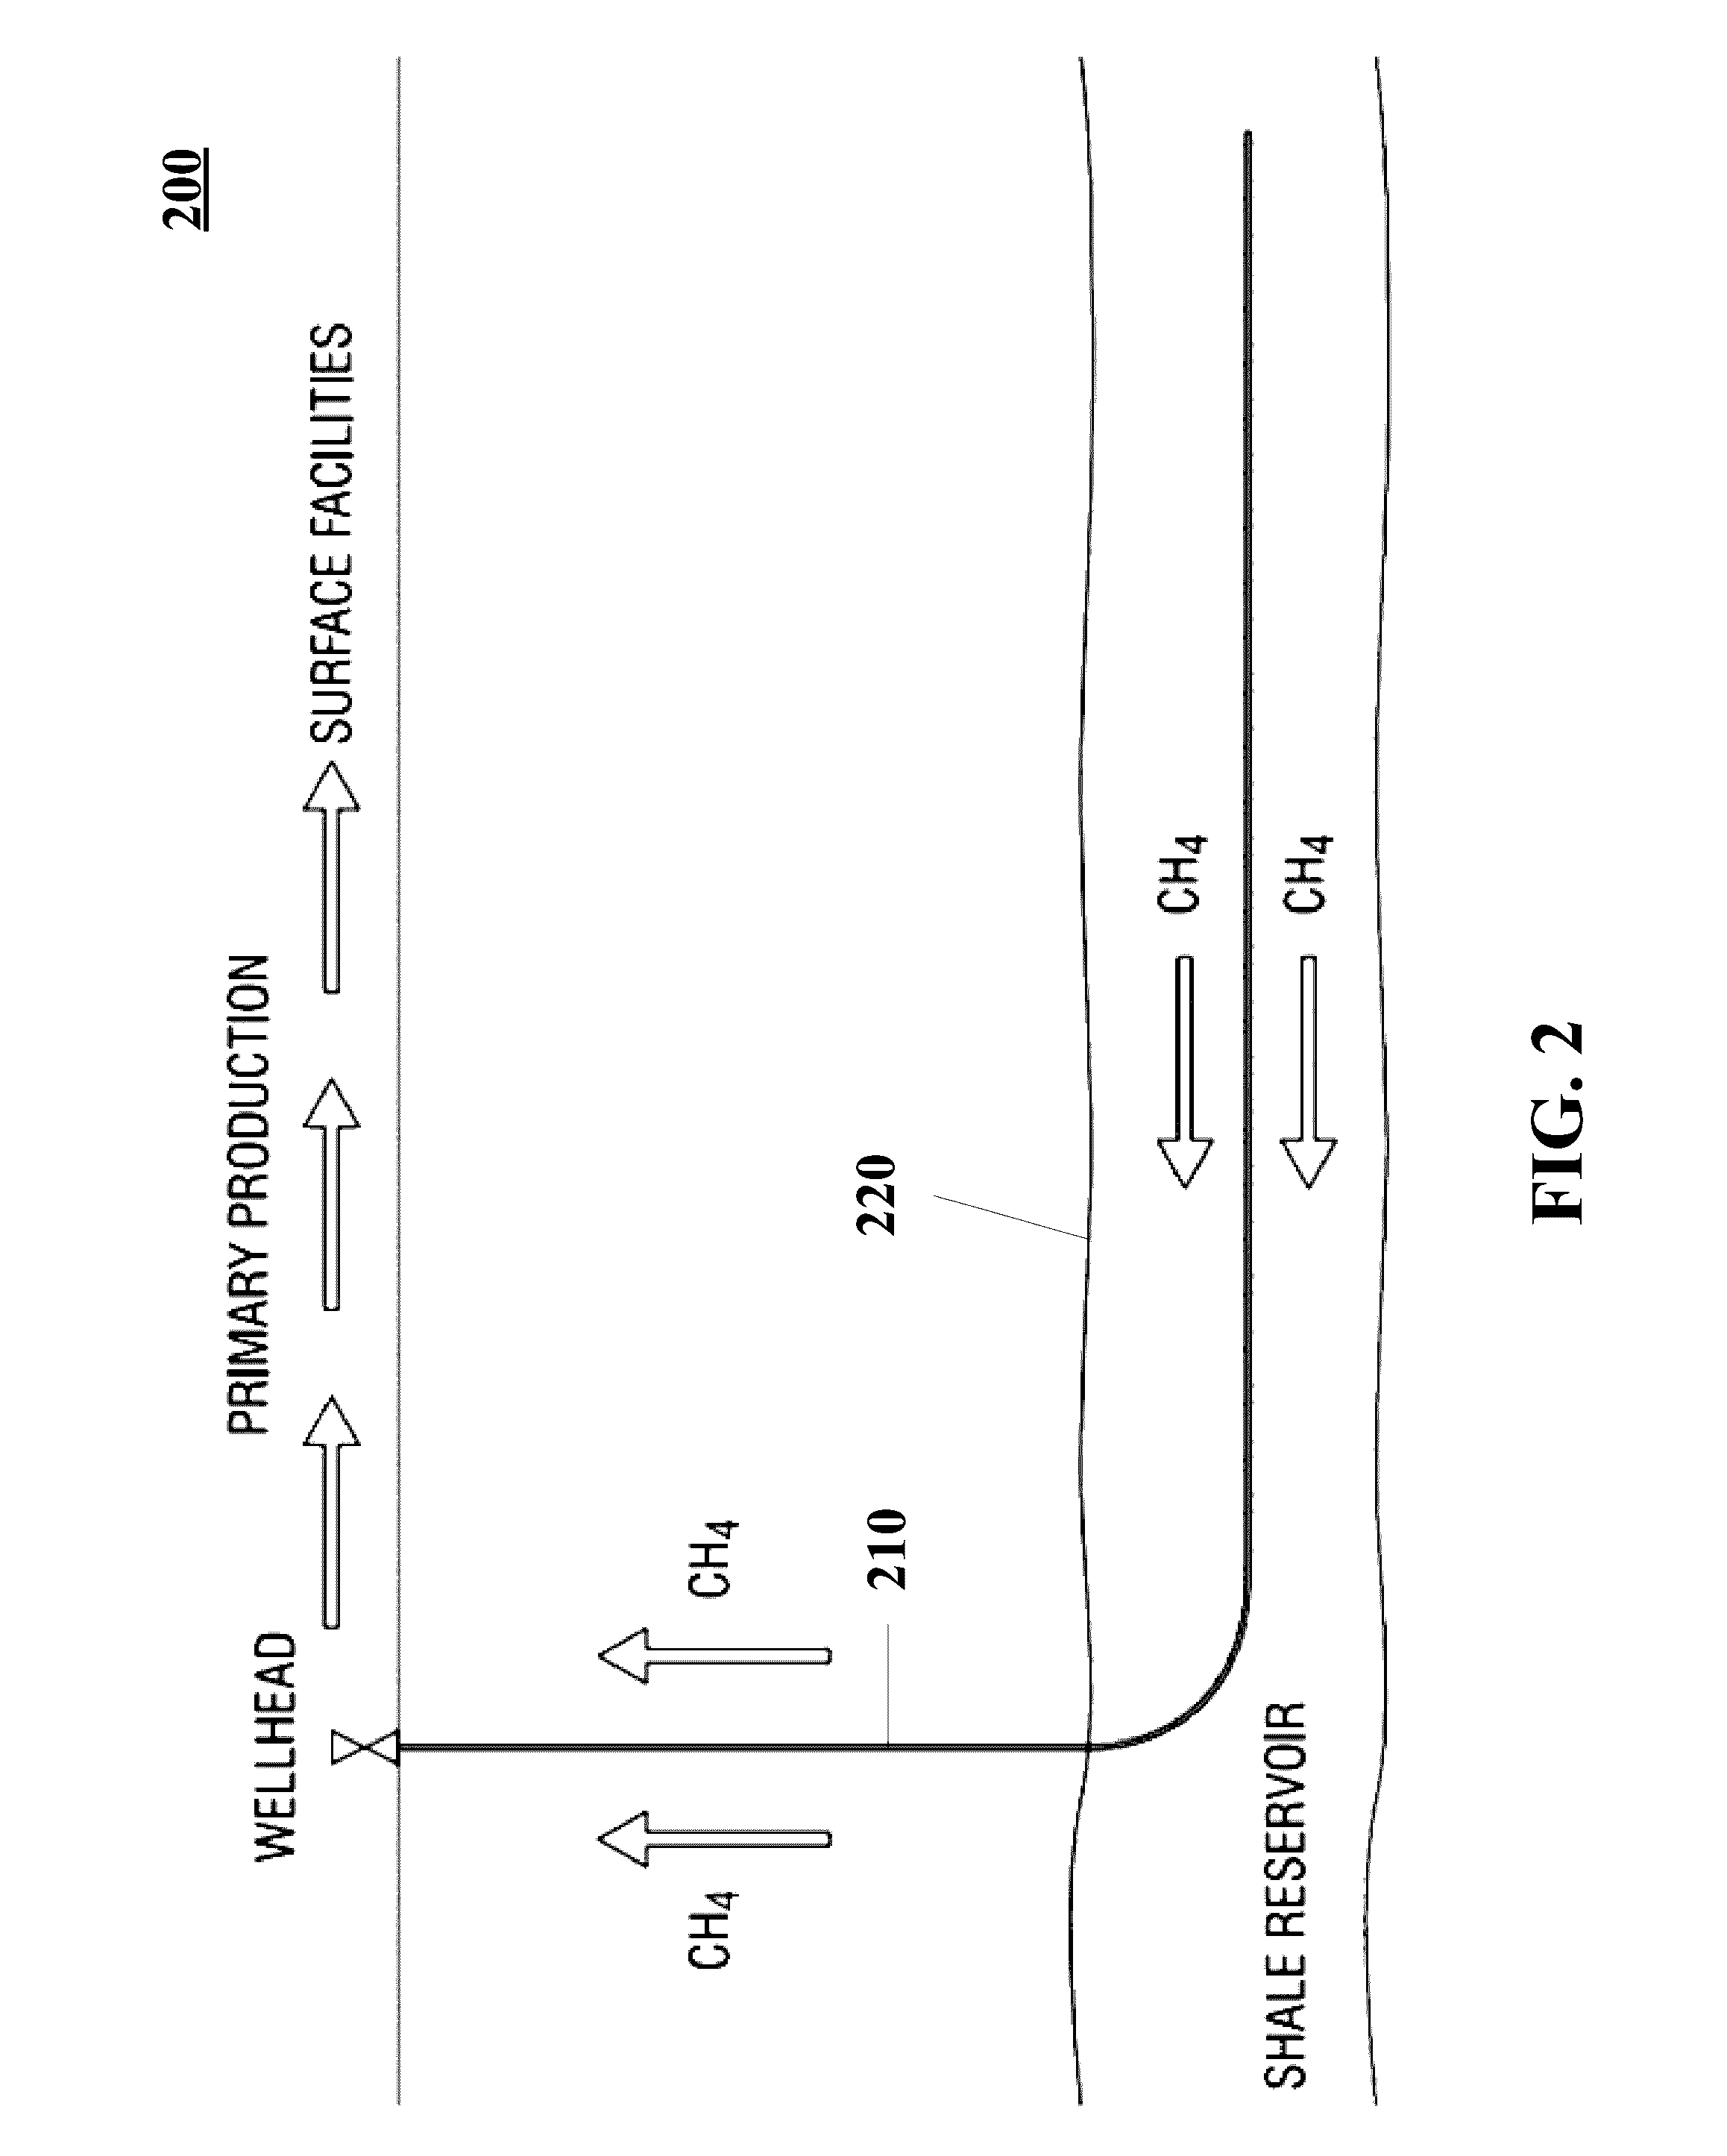 System and Method for Permanent Storage of Carbon Dioxide in Shale Reservoirs